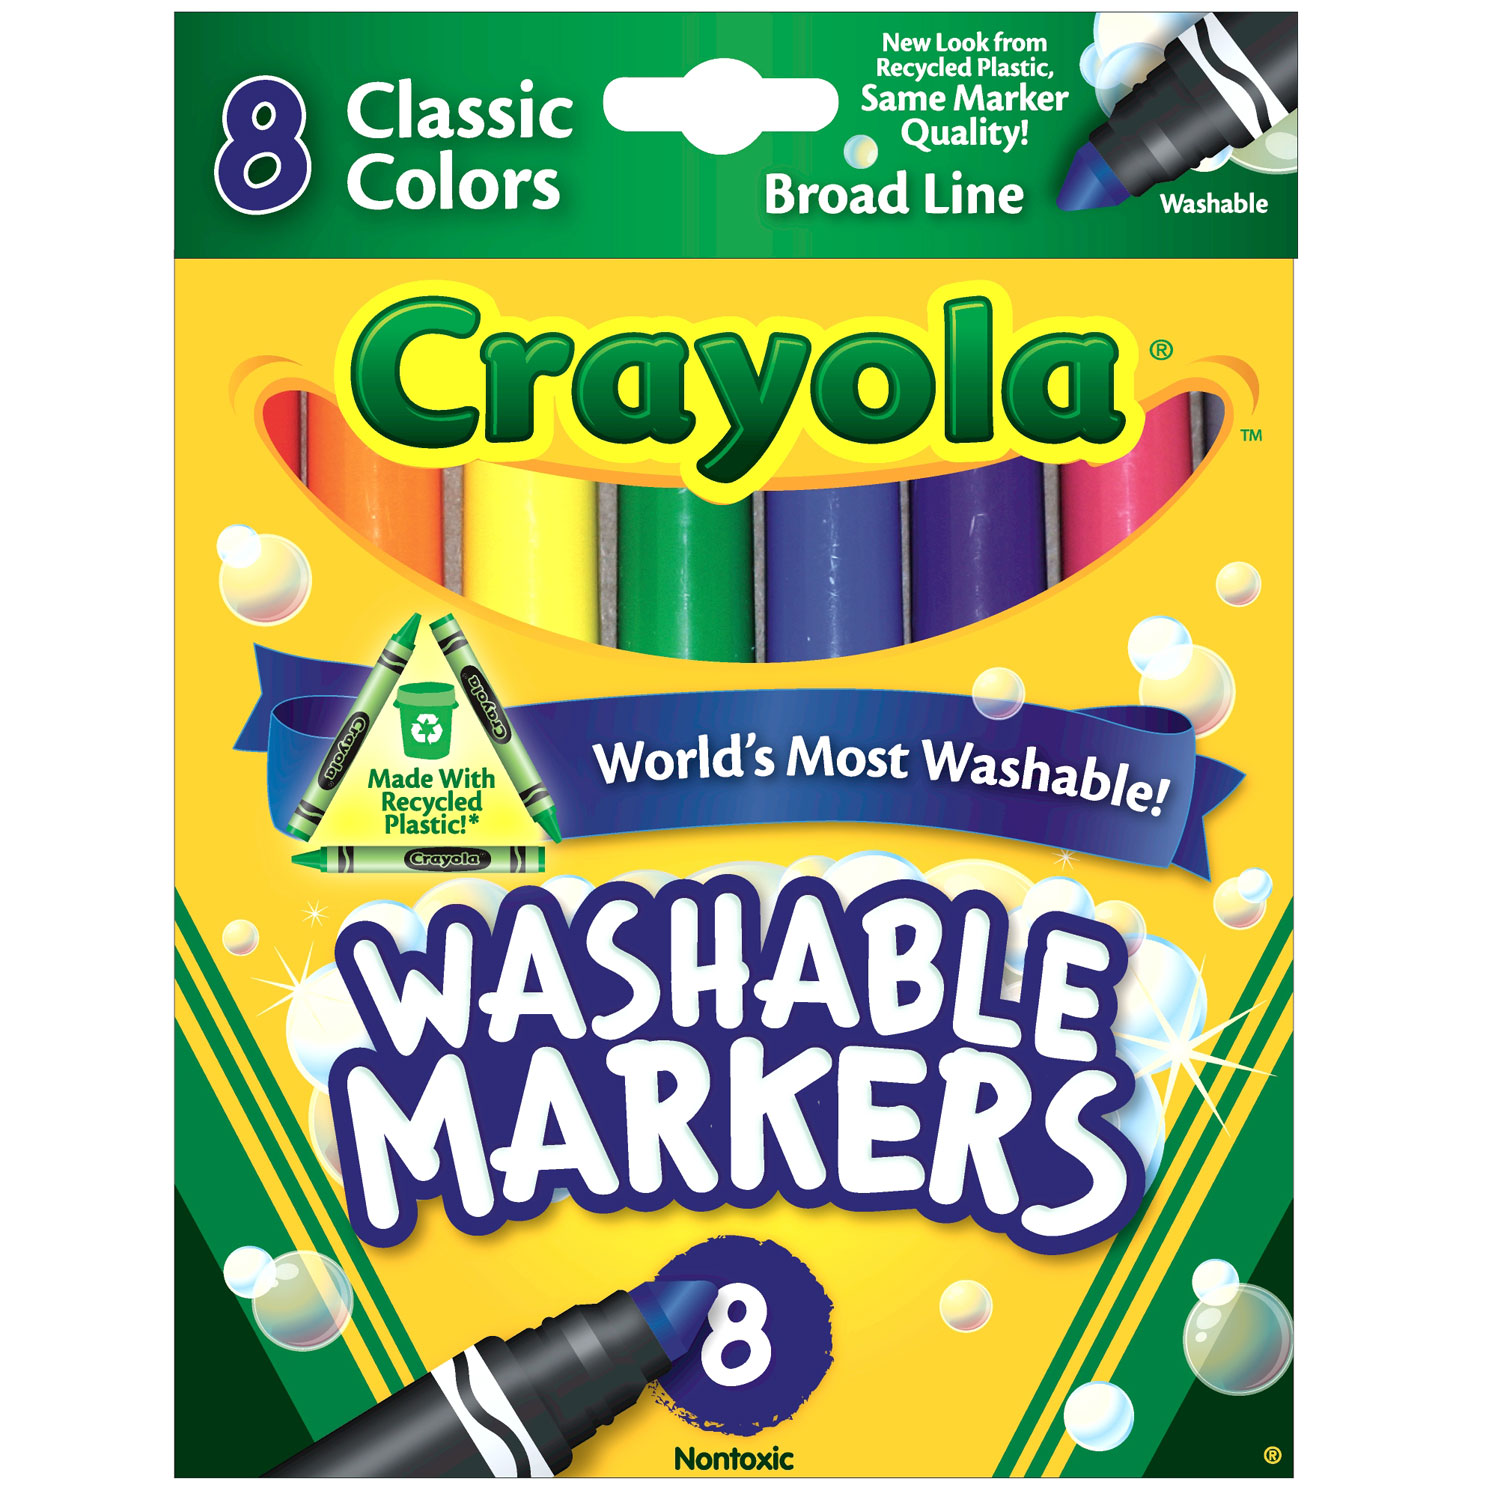 free-crayola-washable-markers-at-walmart-mission-to-save